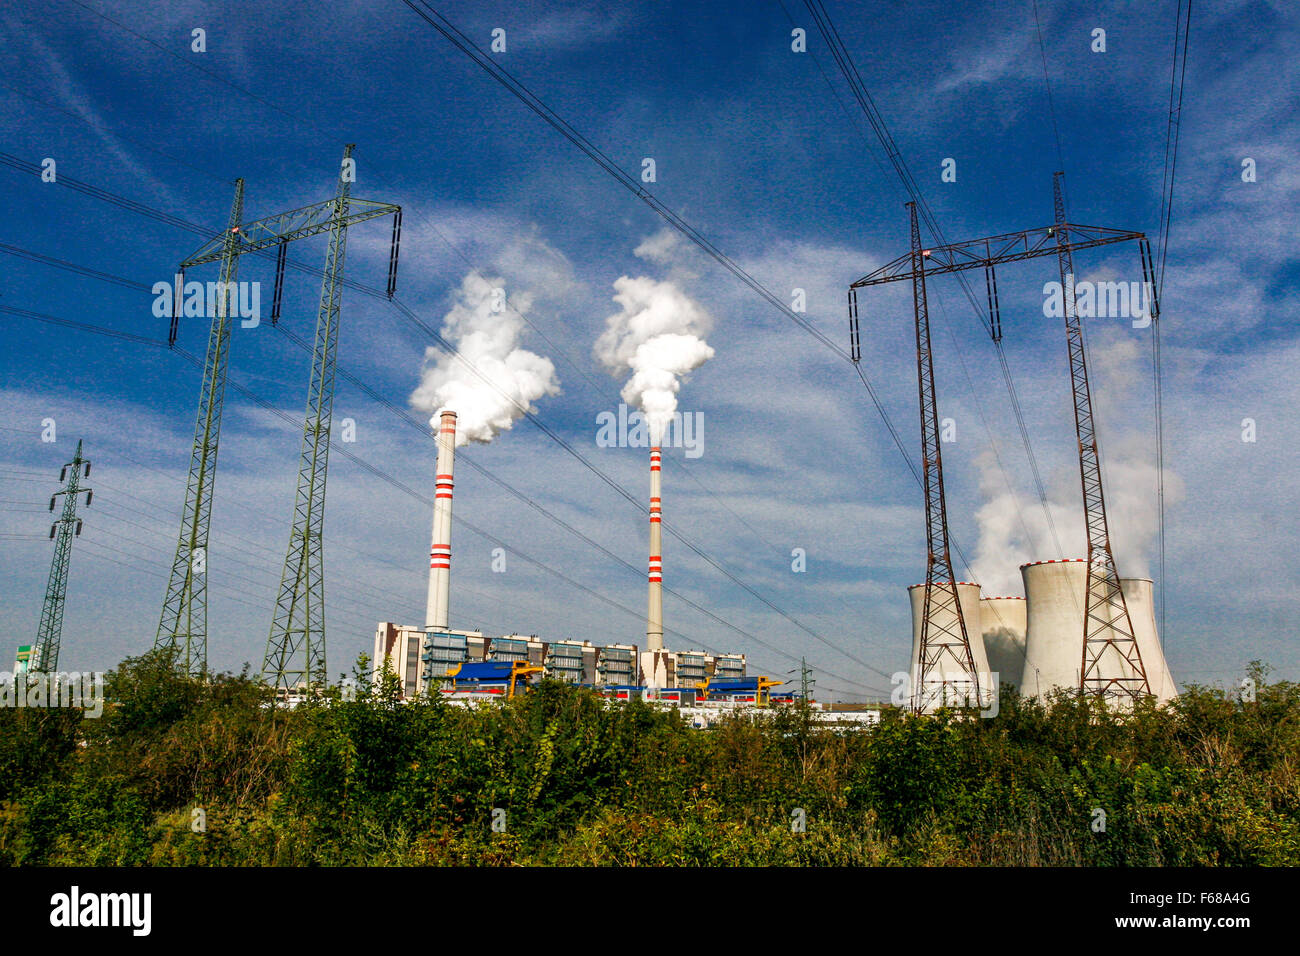 Chimney smoke, Coal power plant, Power lines countryside. Pocerady, North Bohemia, Czech Republic Europe electricity wires connected to a plant Stock Photo